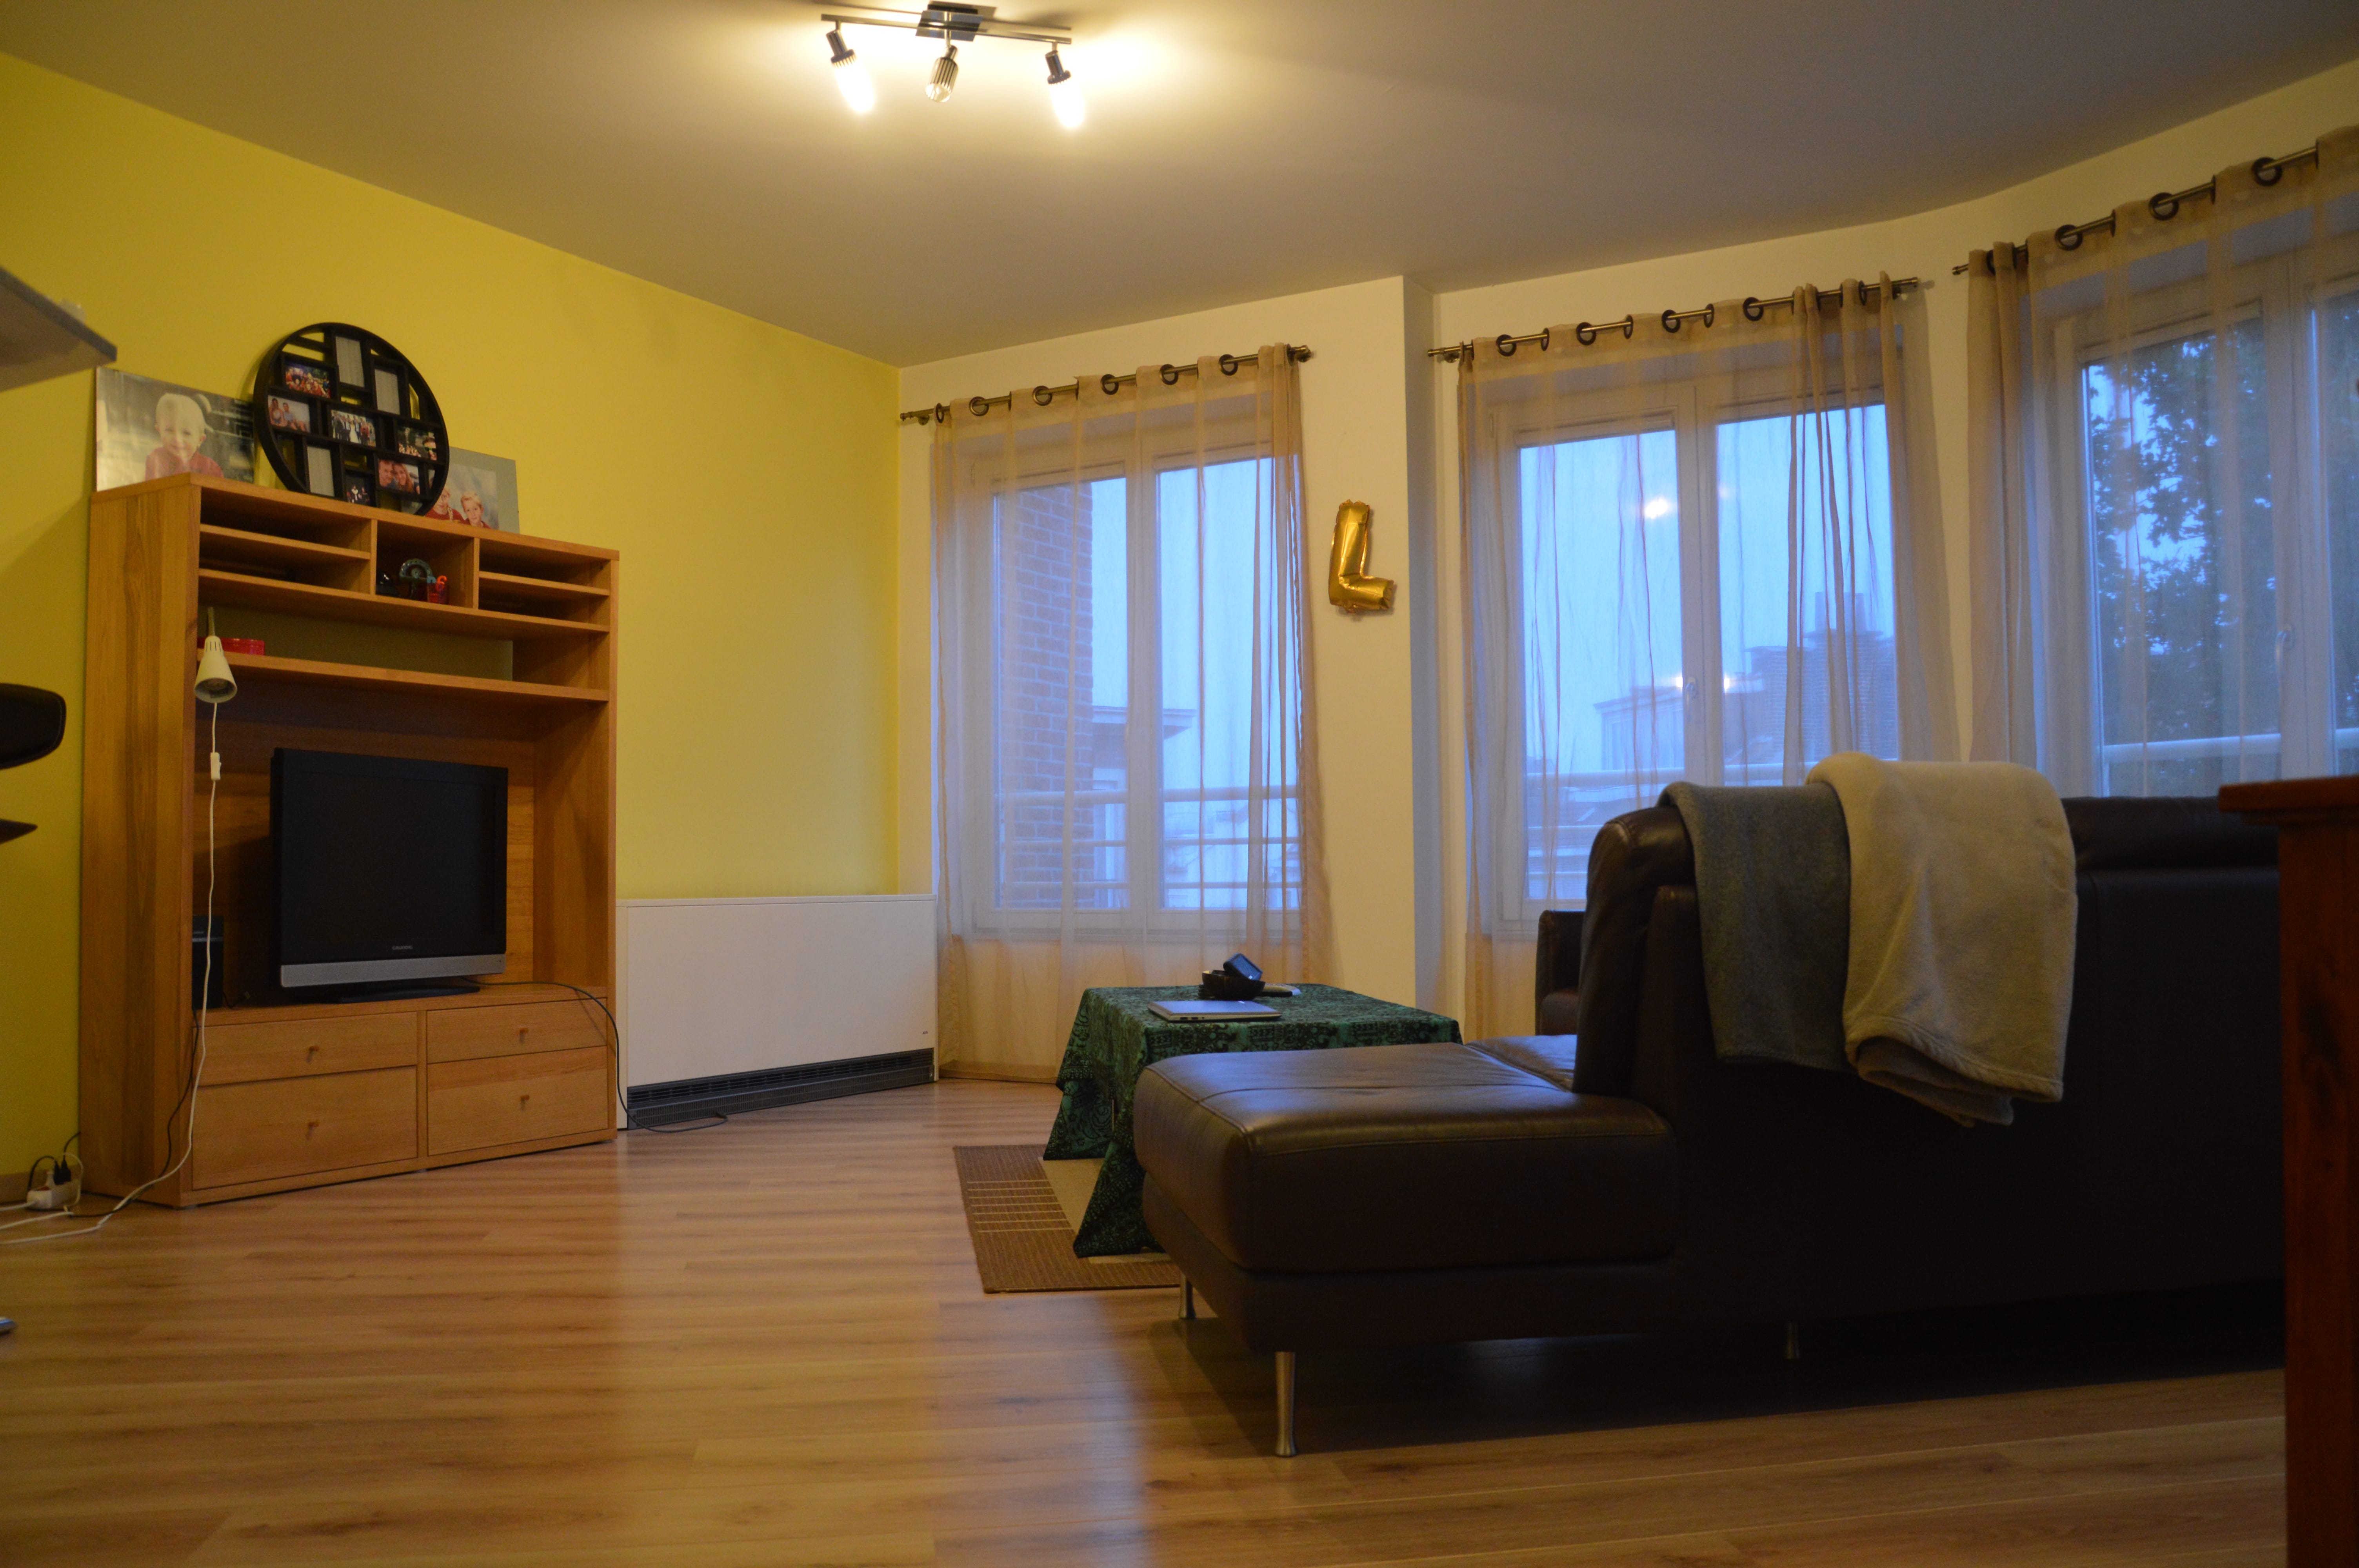 Fully Furnished Apartment To Rent Near Eu Institutions